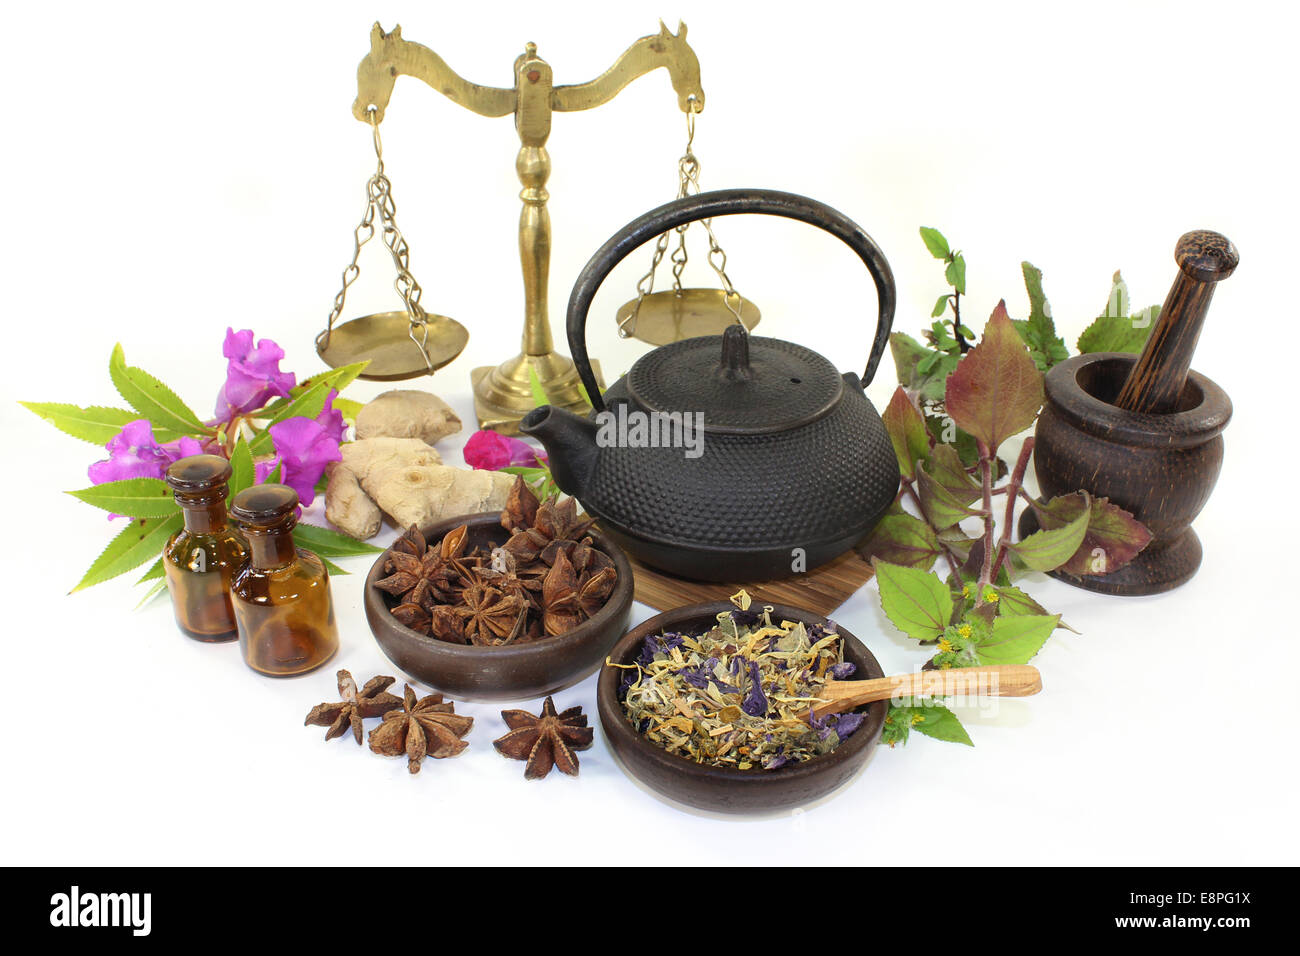 various Chinese remedies on a white background Stock Photo